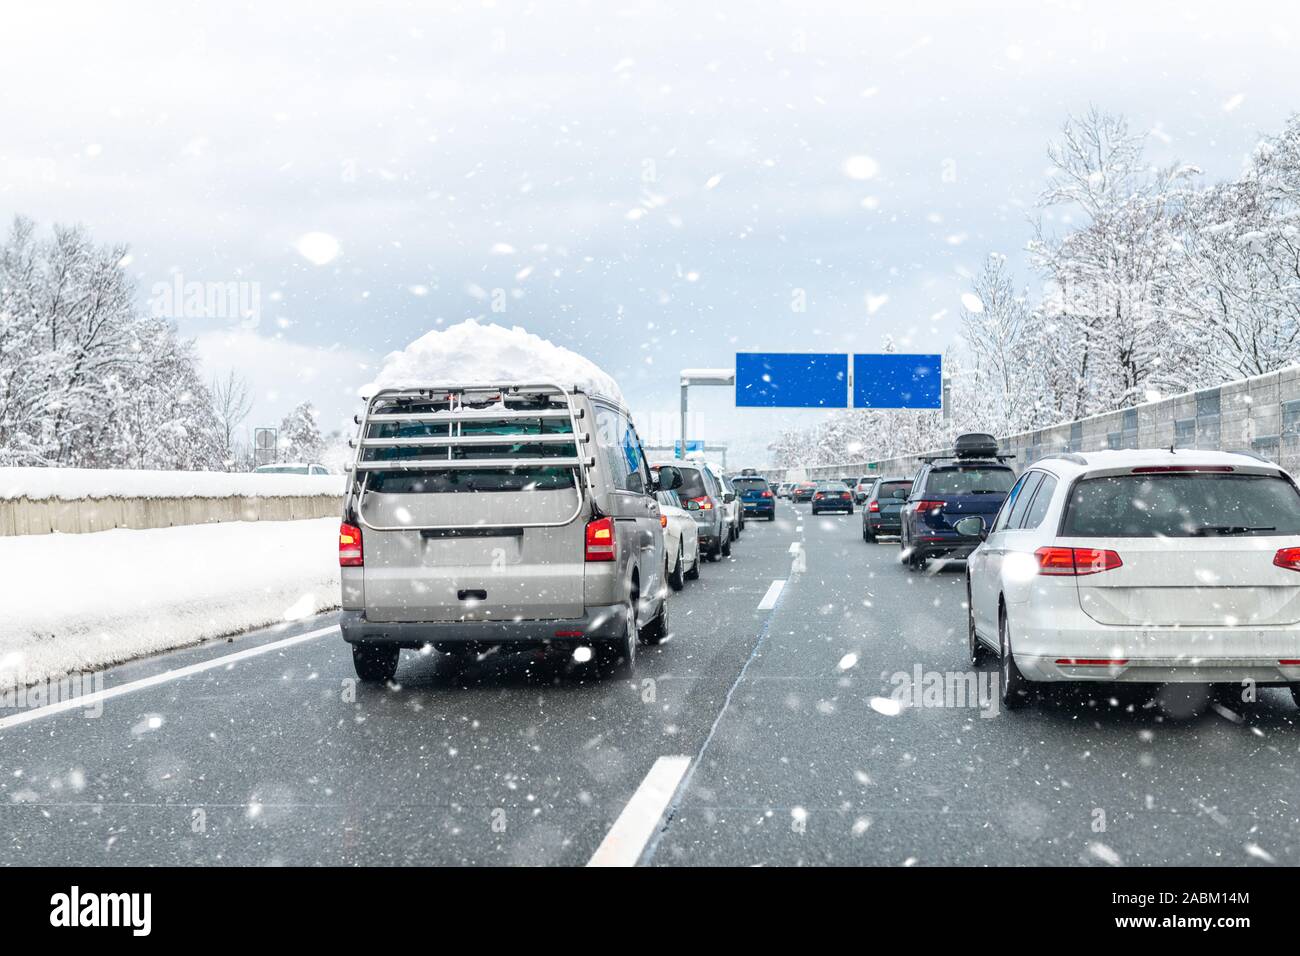 O que significa during weather or traffic delays? - Pergunta